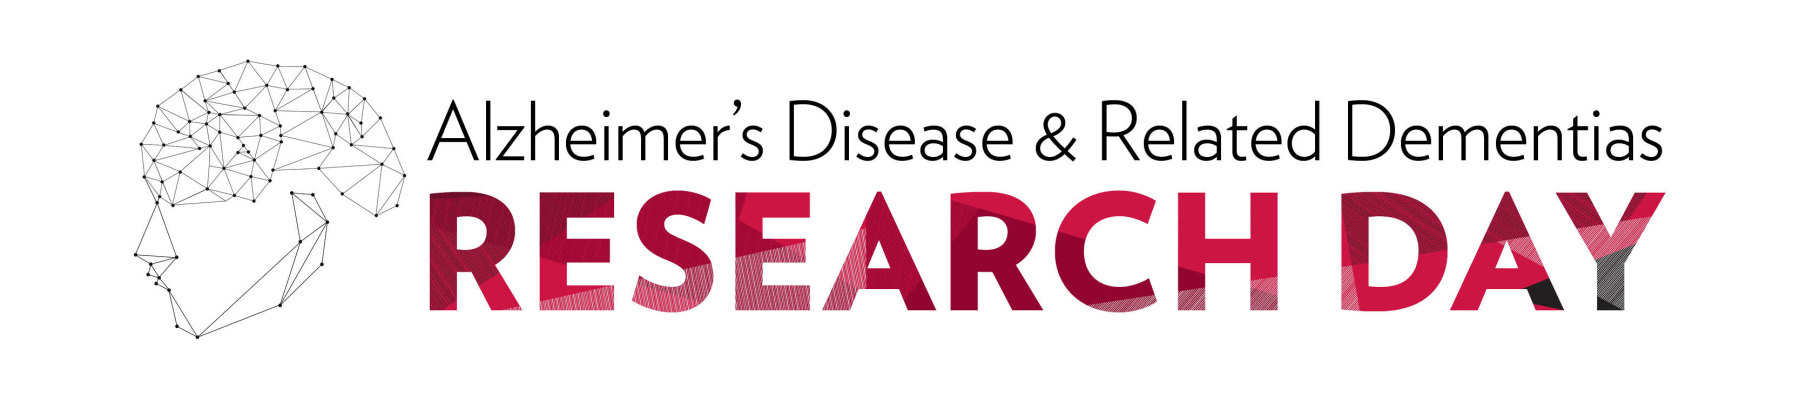 Logo for Alzheimer's Disease & Related Dementias Research Day